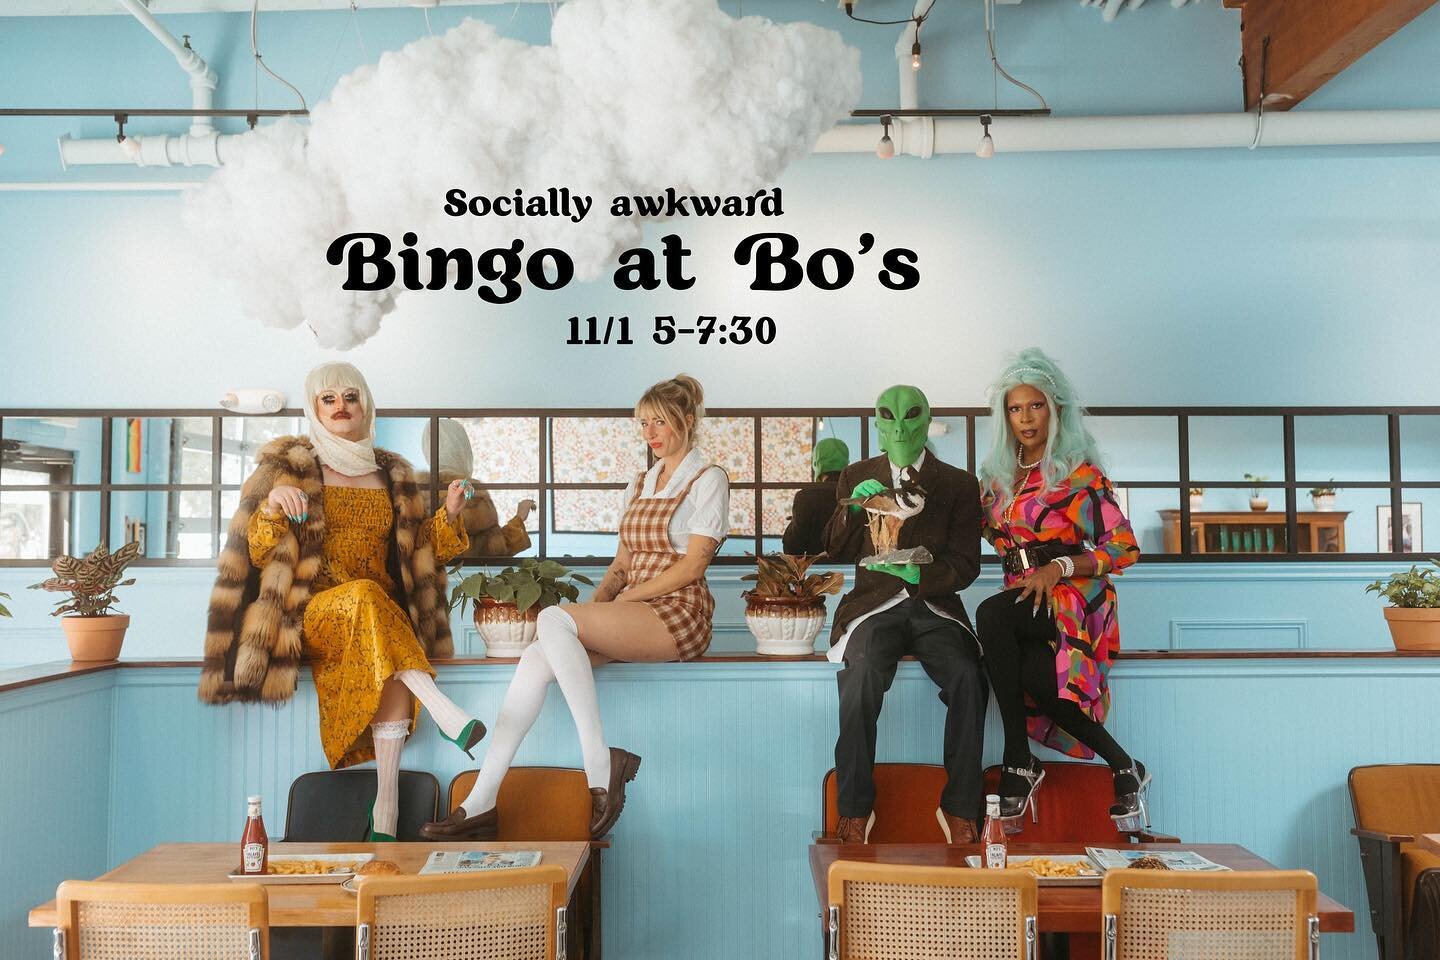 I have that thing where I want to make friends/be social and outgoing, but I also want to be completely alone and not looked at or perceived, which is ambivert I think? So I thought hosting bingo at Bo&rsquo;s would be a nice way for me to try that a